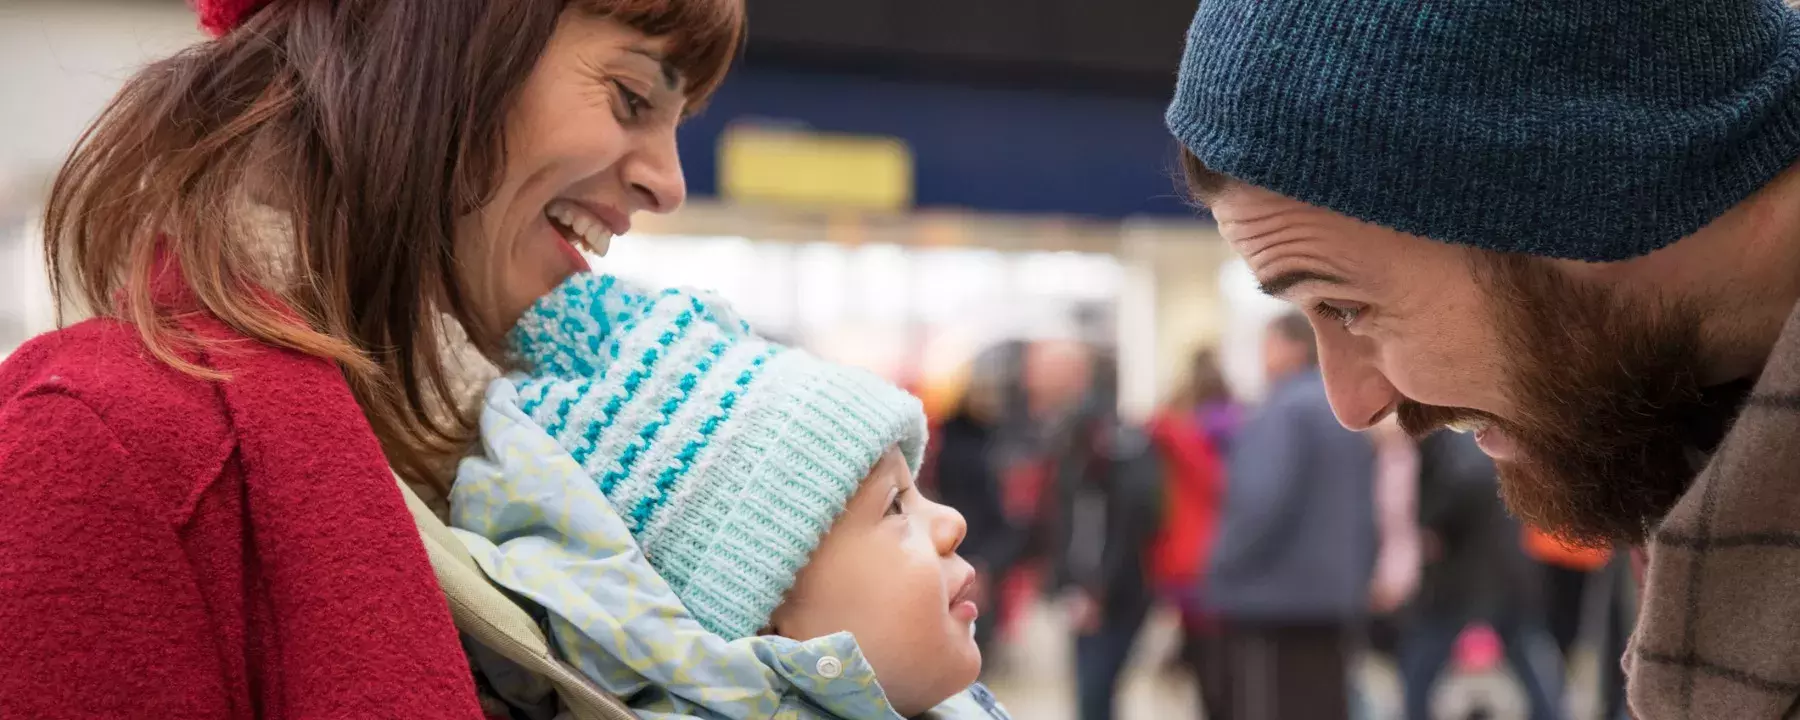 Customer experience - mum and dad with baby at train station - 1800x720